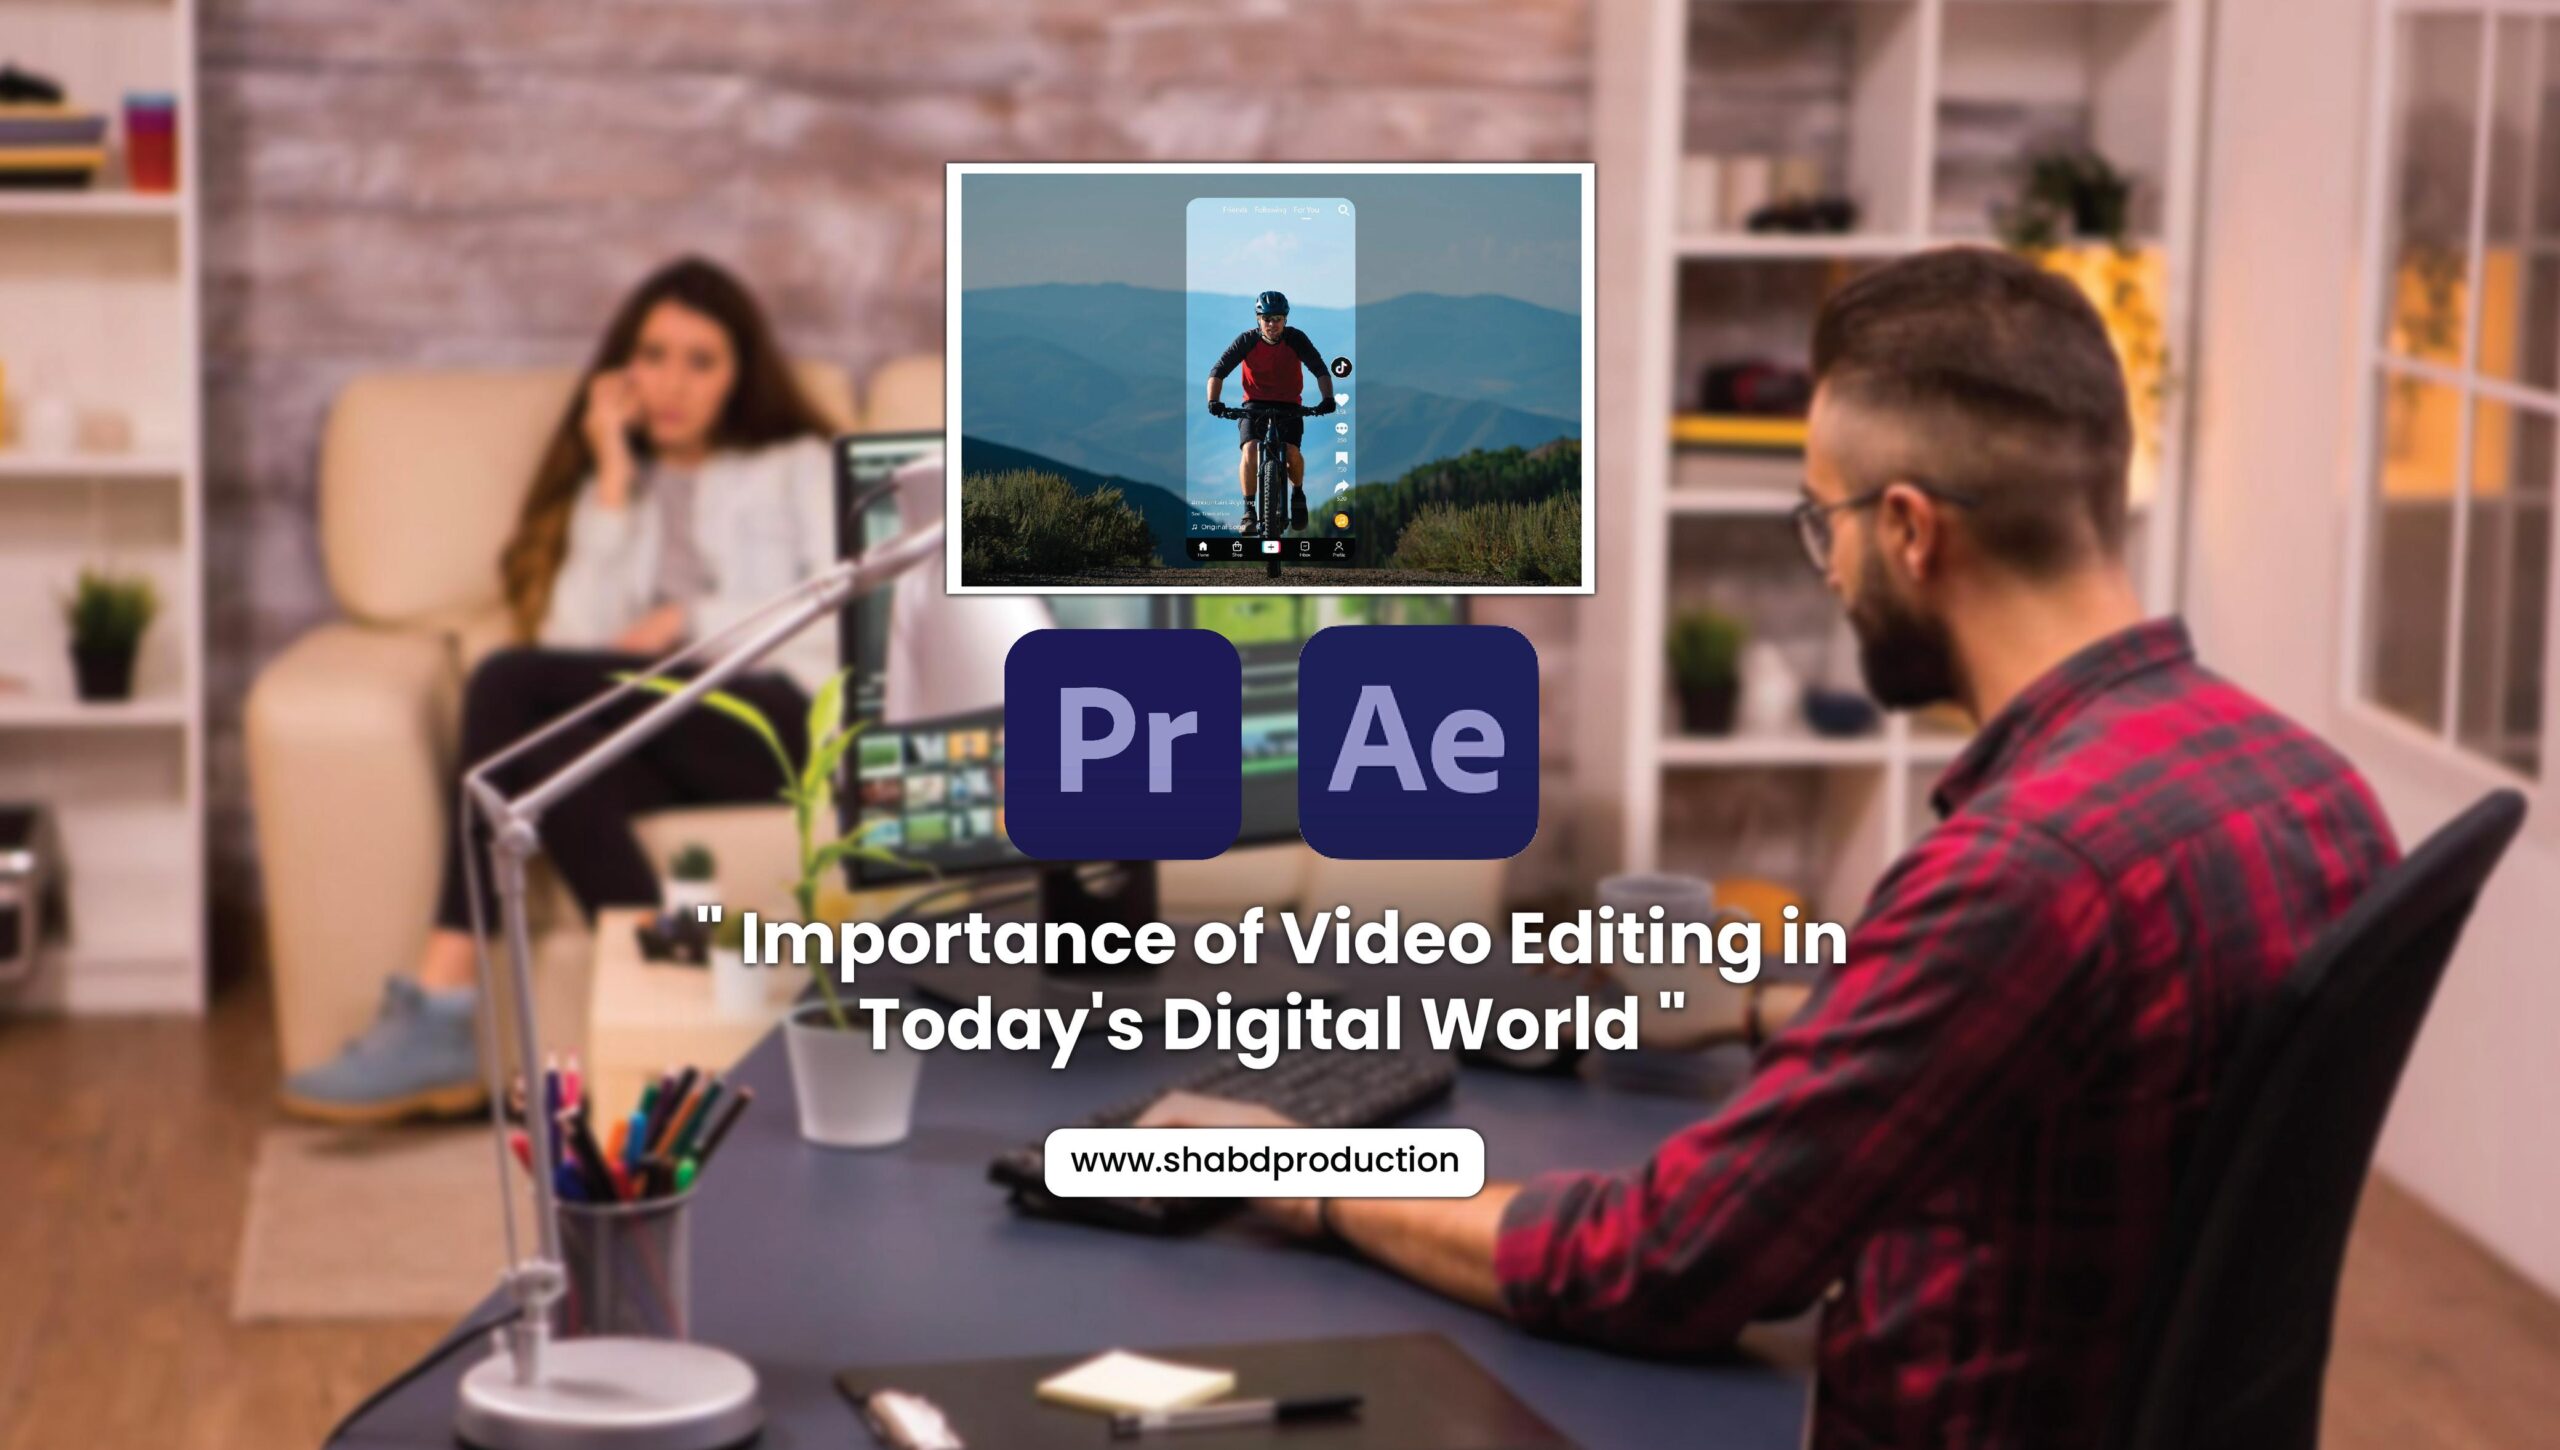 Importance of Video Editing in Today’s Digital World